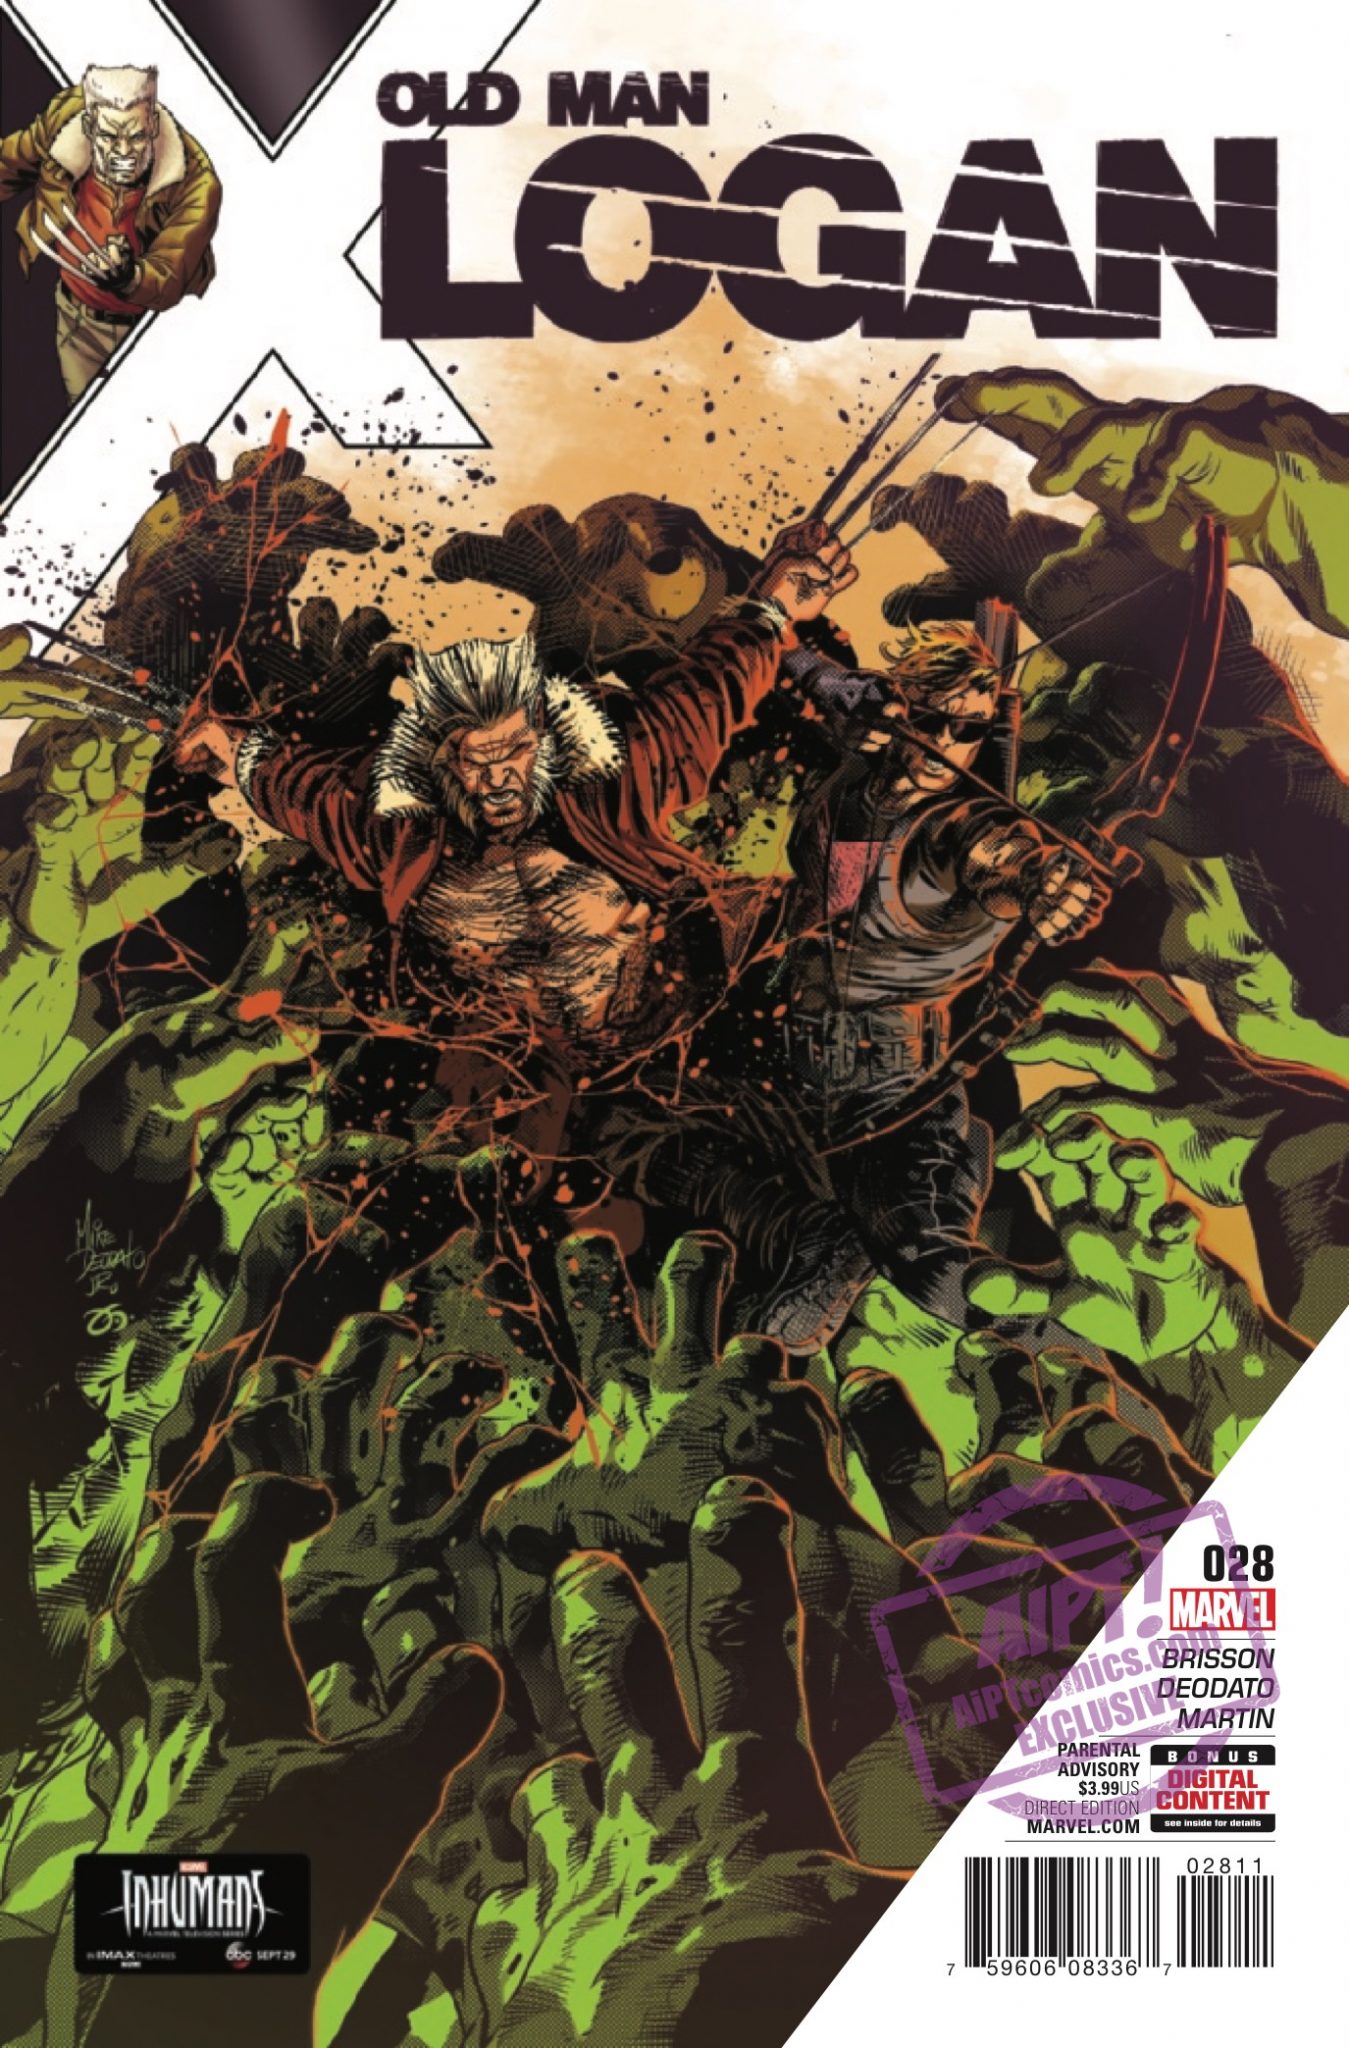 [EXCLUSIVE] Marvel Preview: Old Man Logan #28